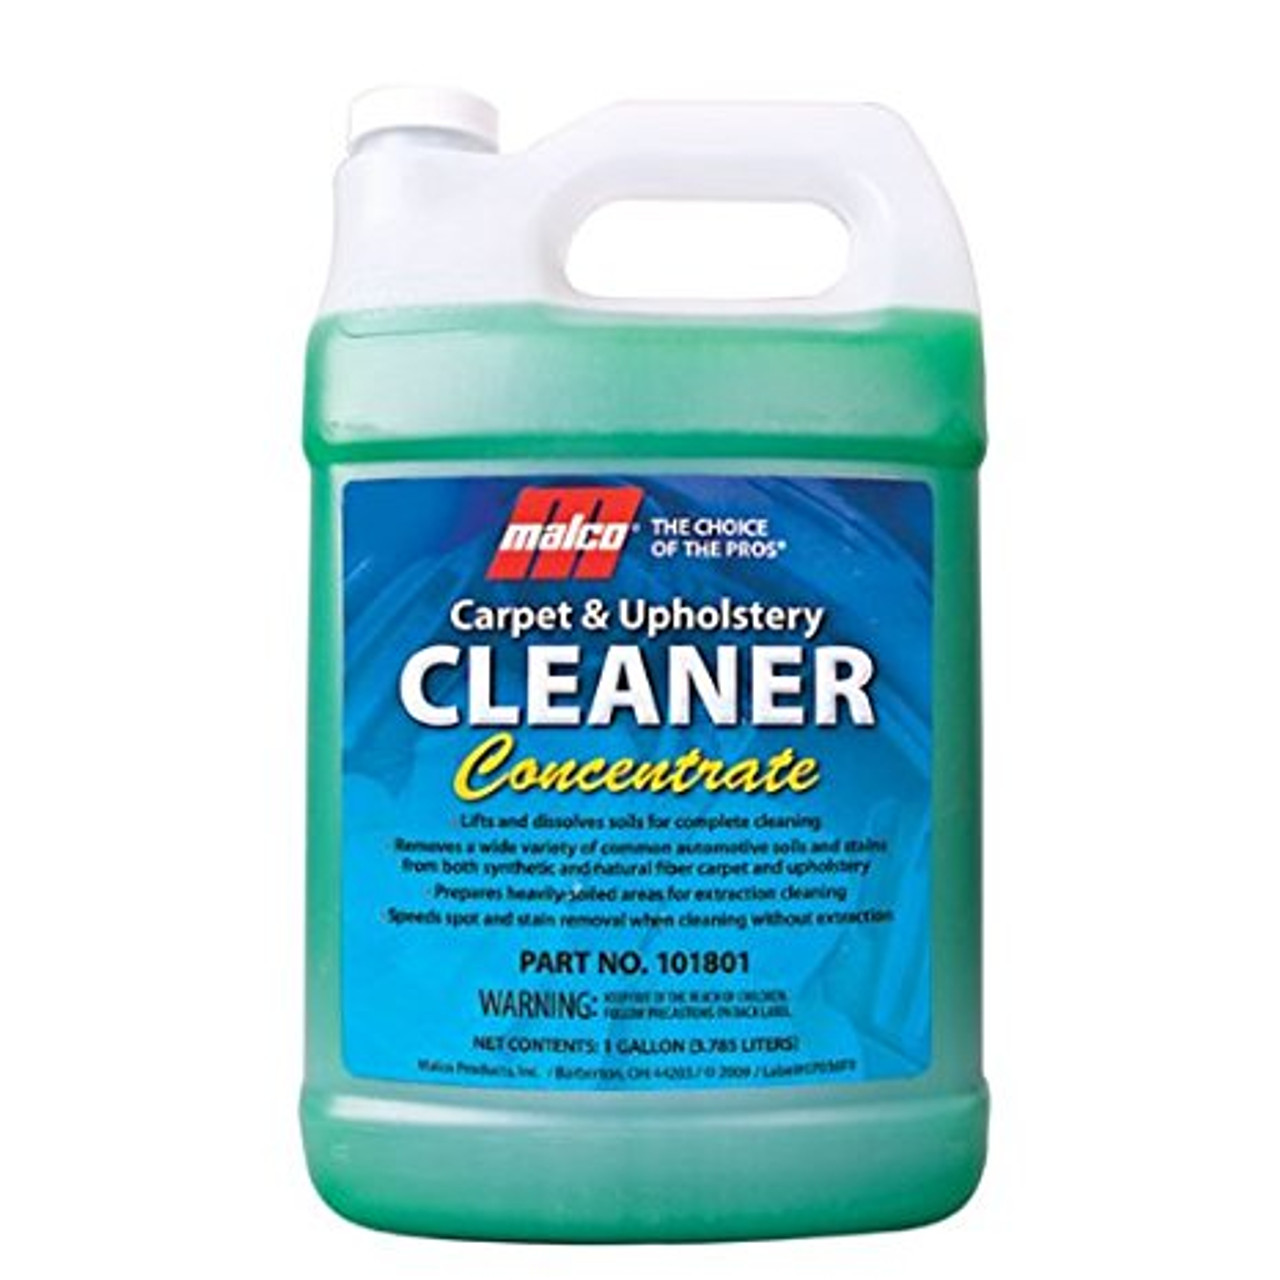 Malco Carpet and Upholstery Cleaner Concentrate Removes Ground-in SOI